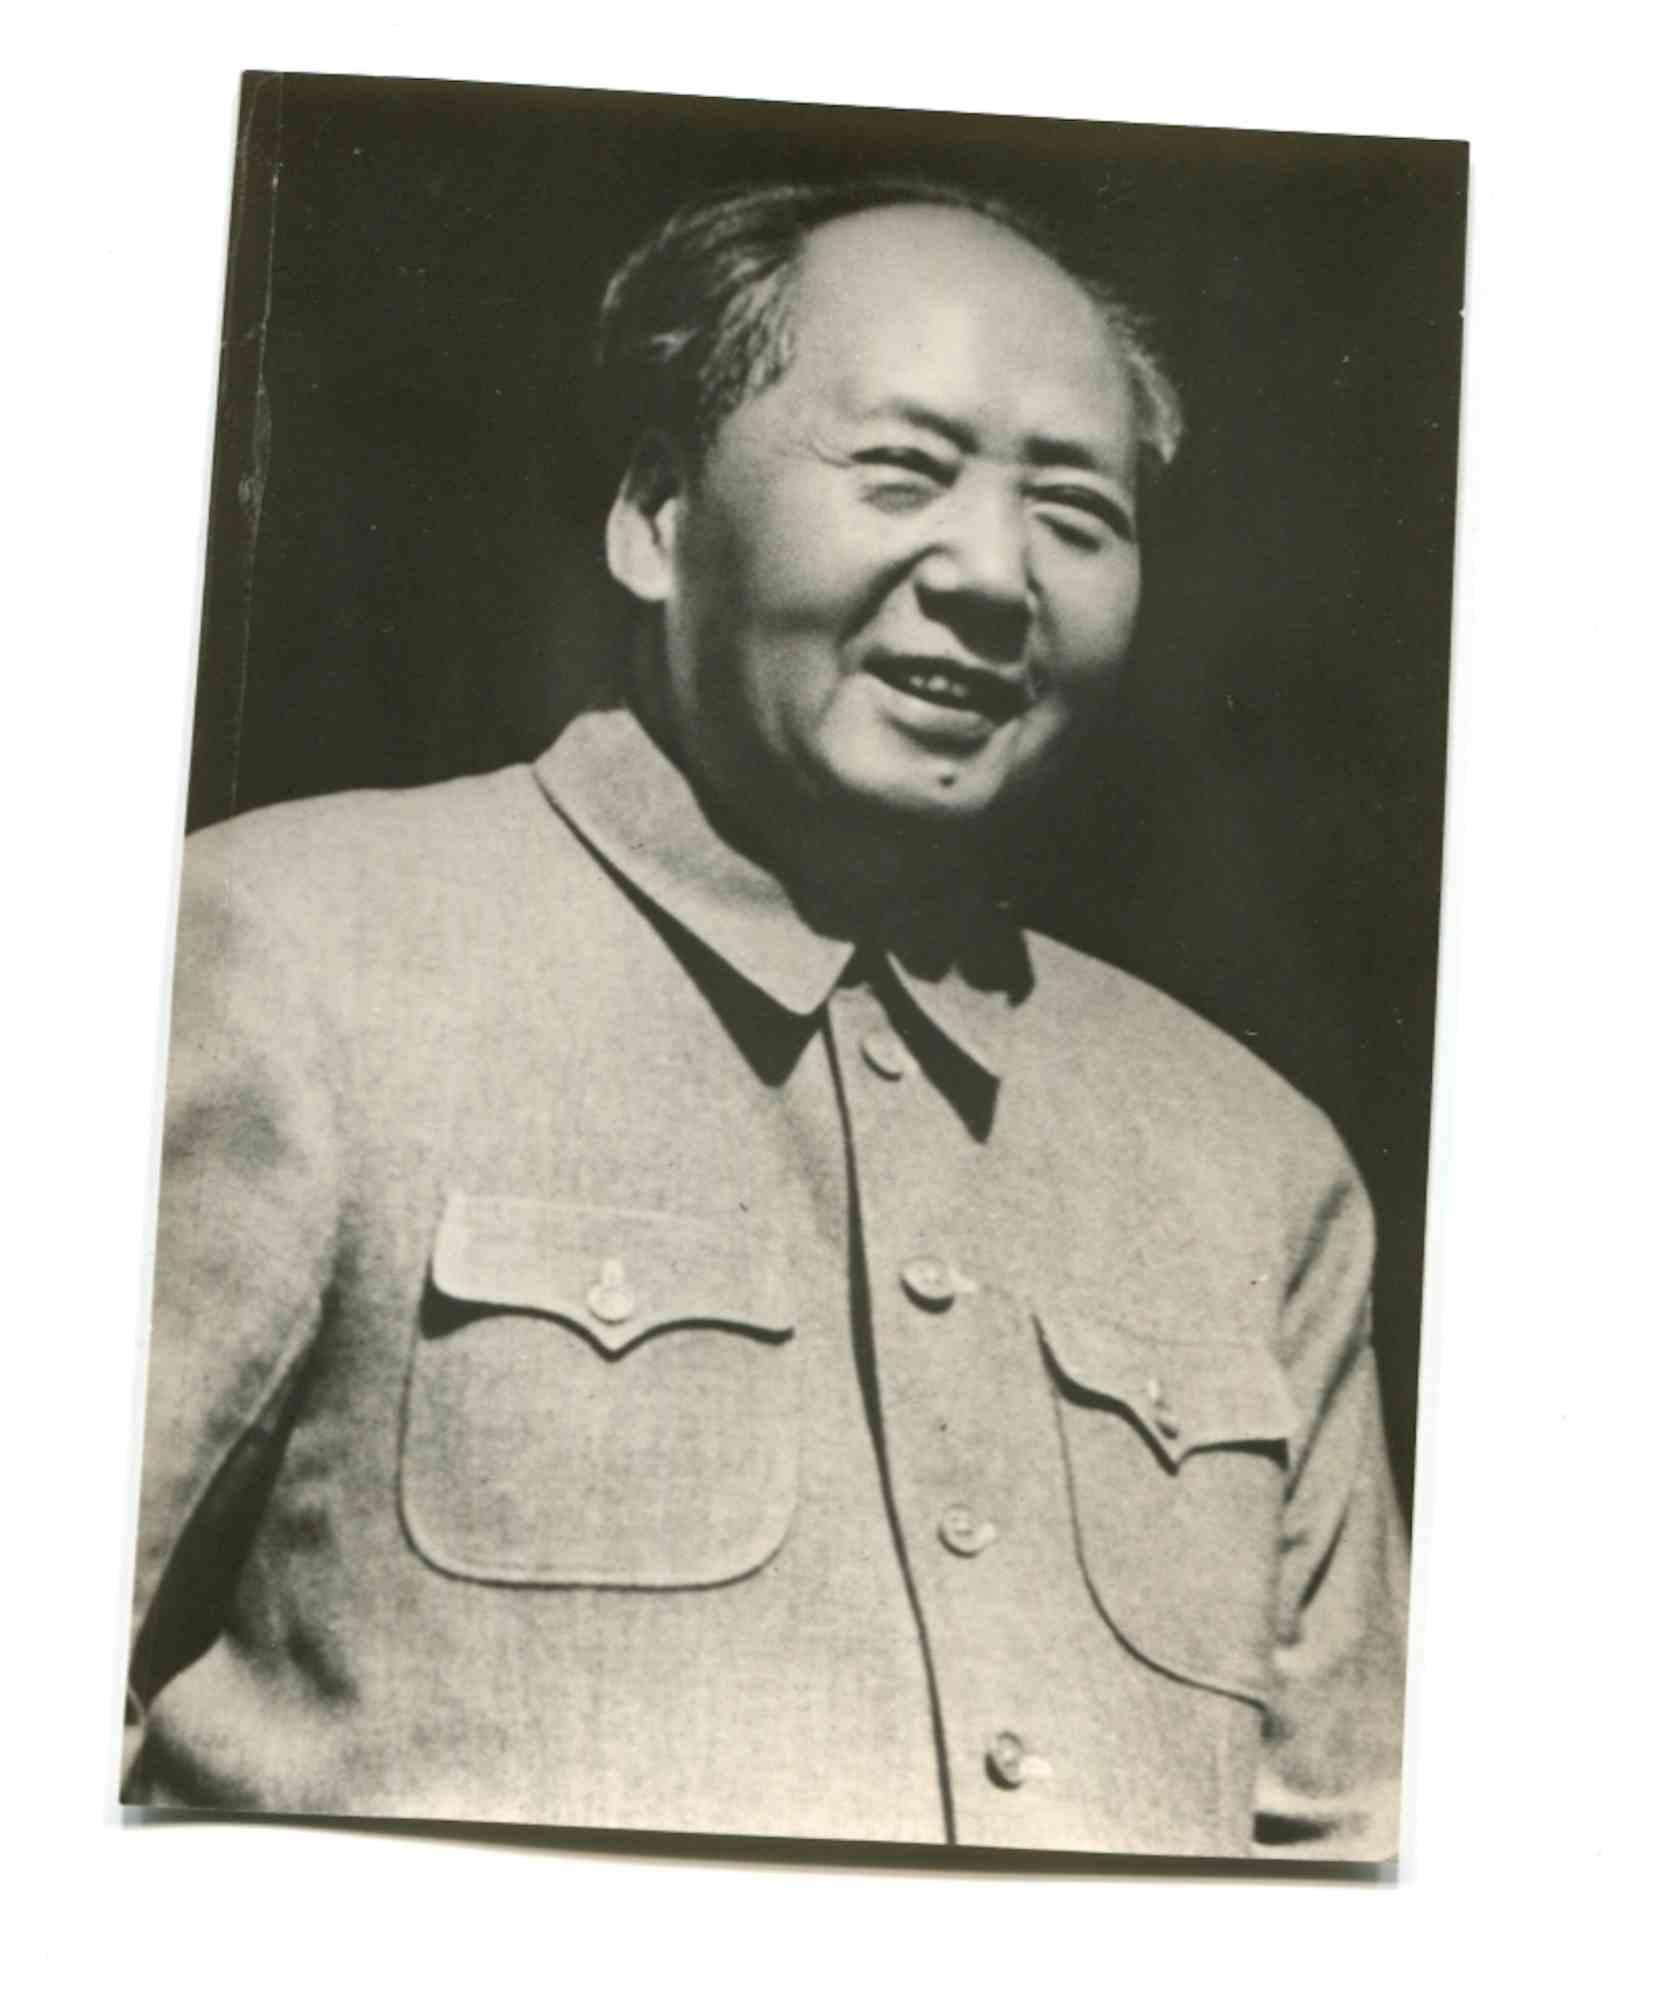 Unknown Figurative Photograph - Mao Zedong - Vintage Photo - 1960s